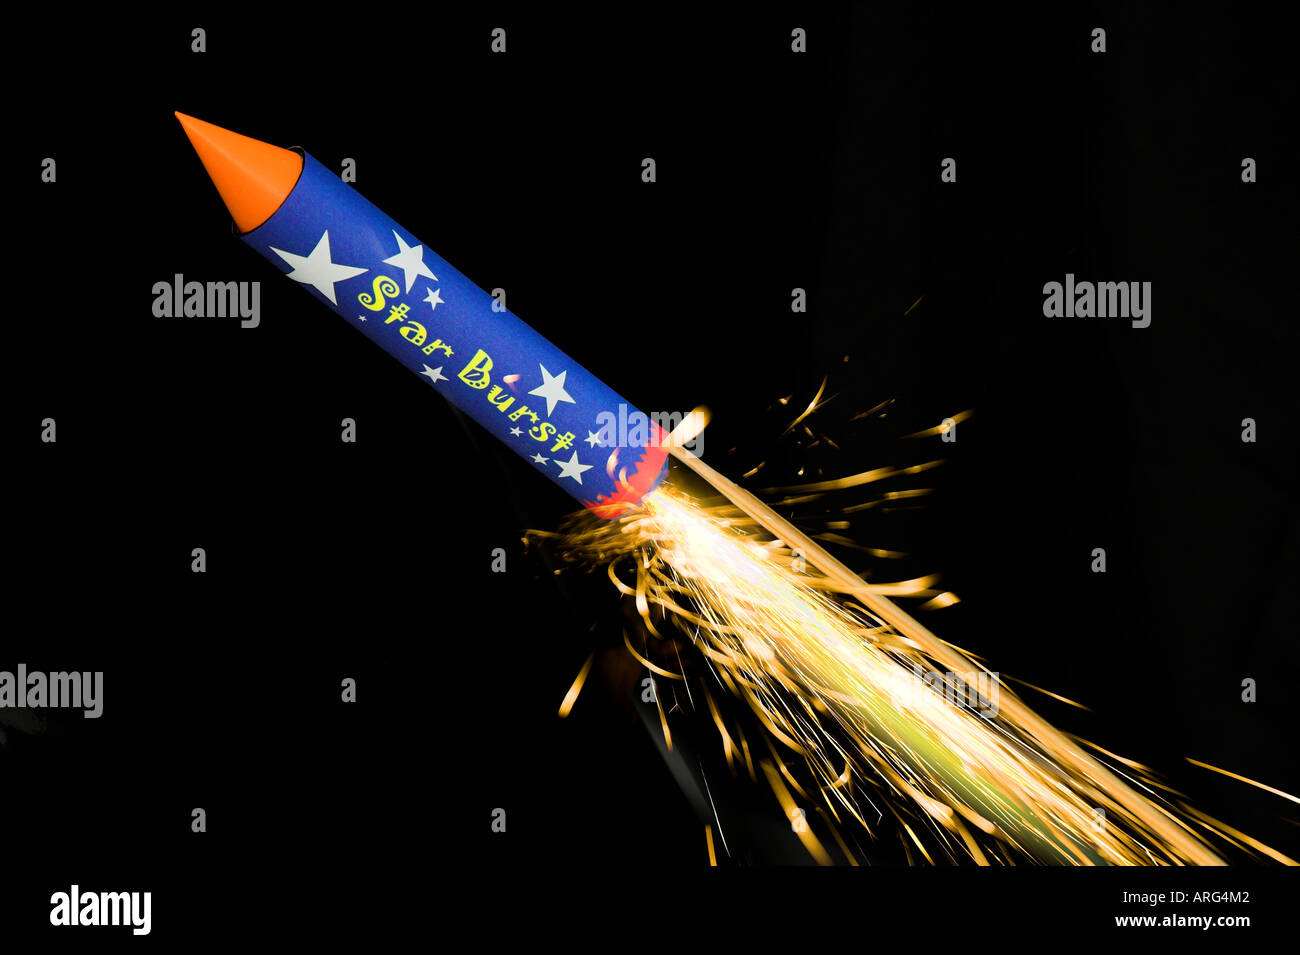 A firework rocket with trail of sparks captured against black Stock Photo